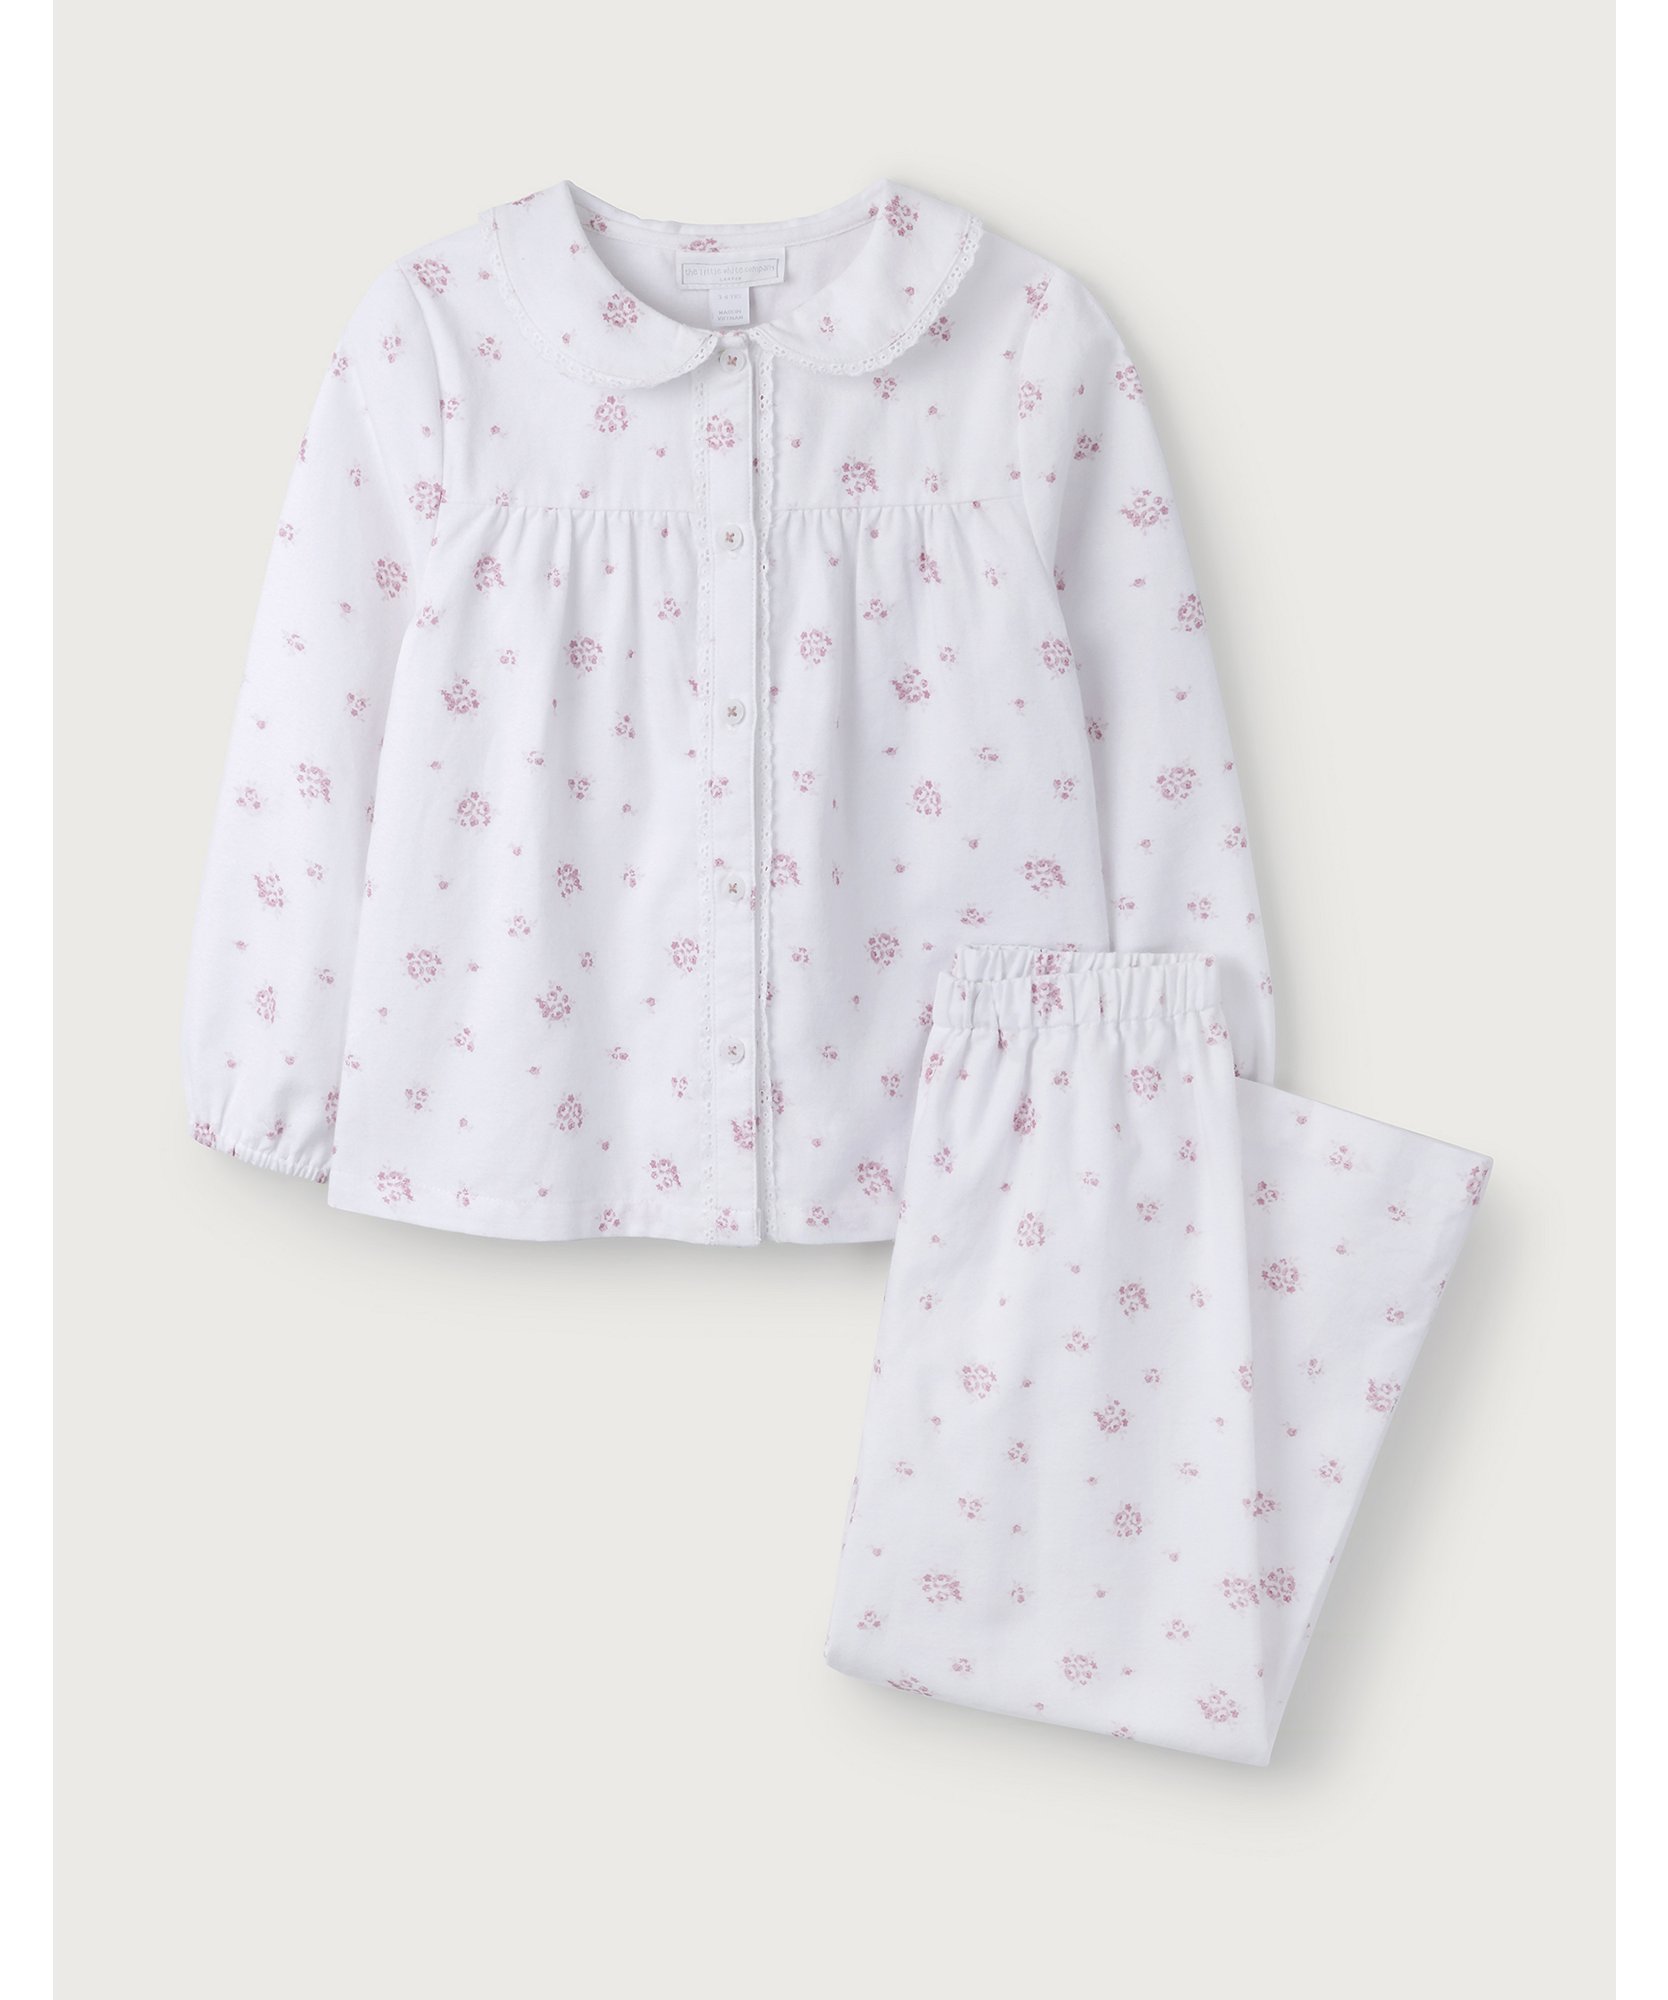 / Classic Harvest Floral Flannel Pyjamas 1-12yrs The White Company Clothing Loungewear Pajamas 4-5Y 